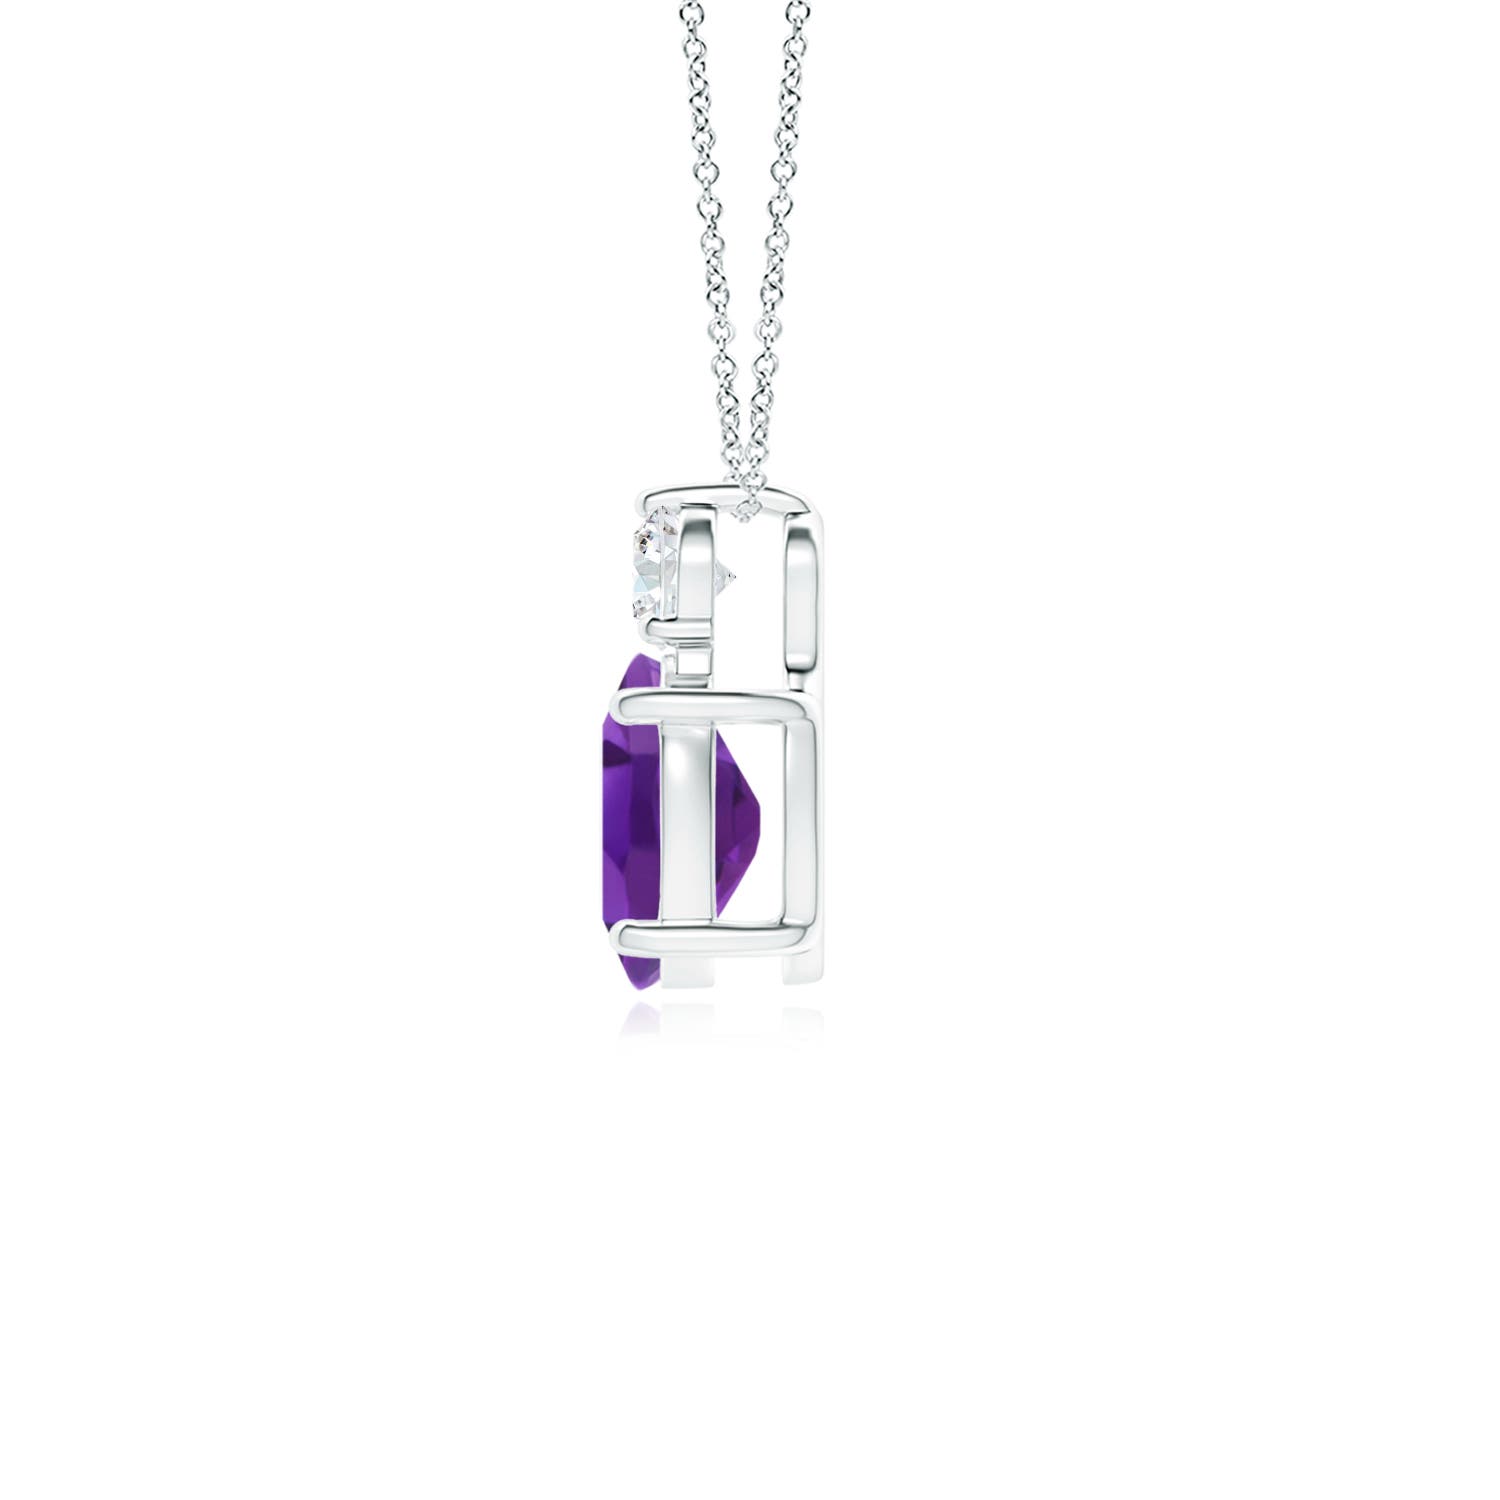 AAA - Amethyst / 1.31 CT / 14 KT White Gold